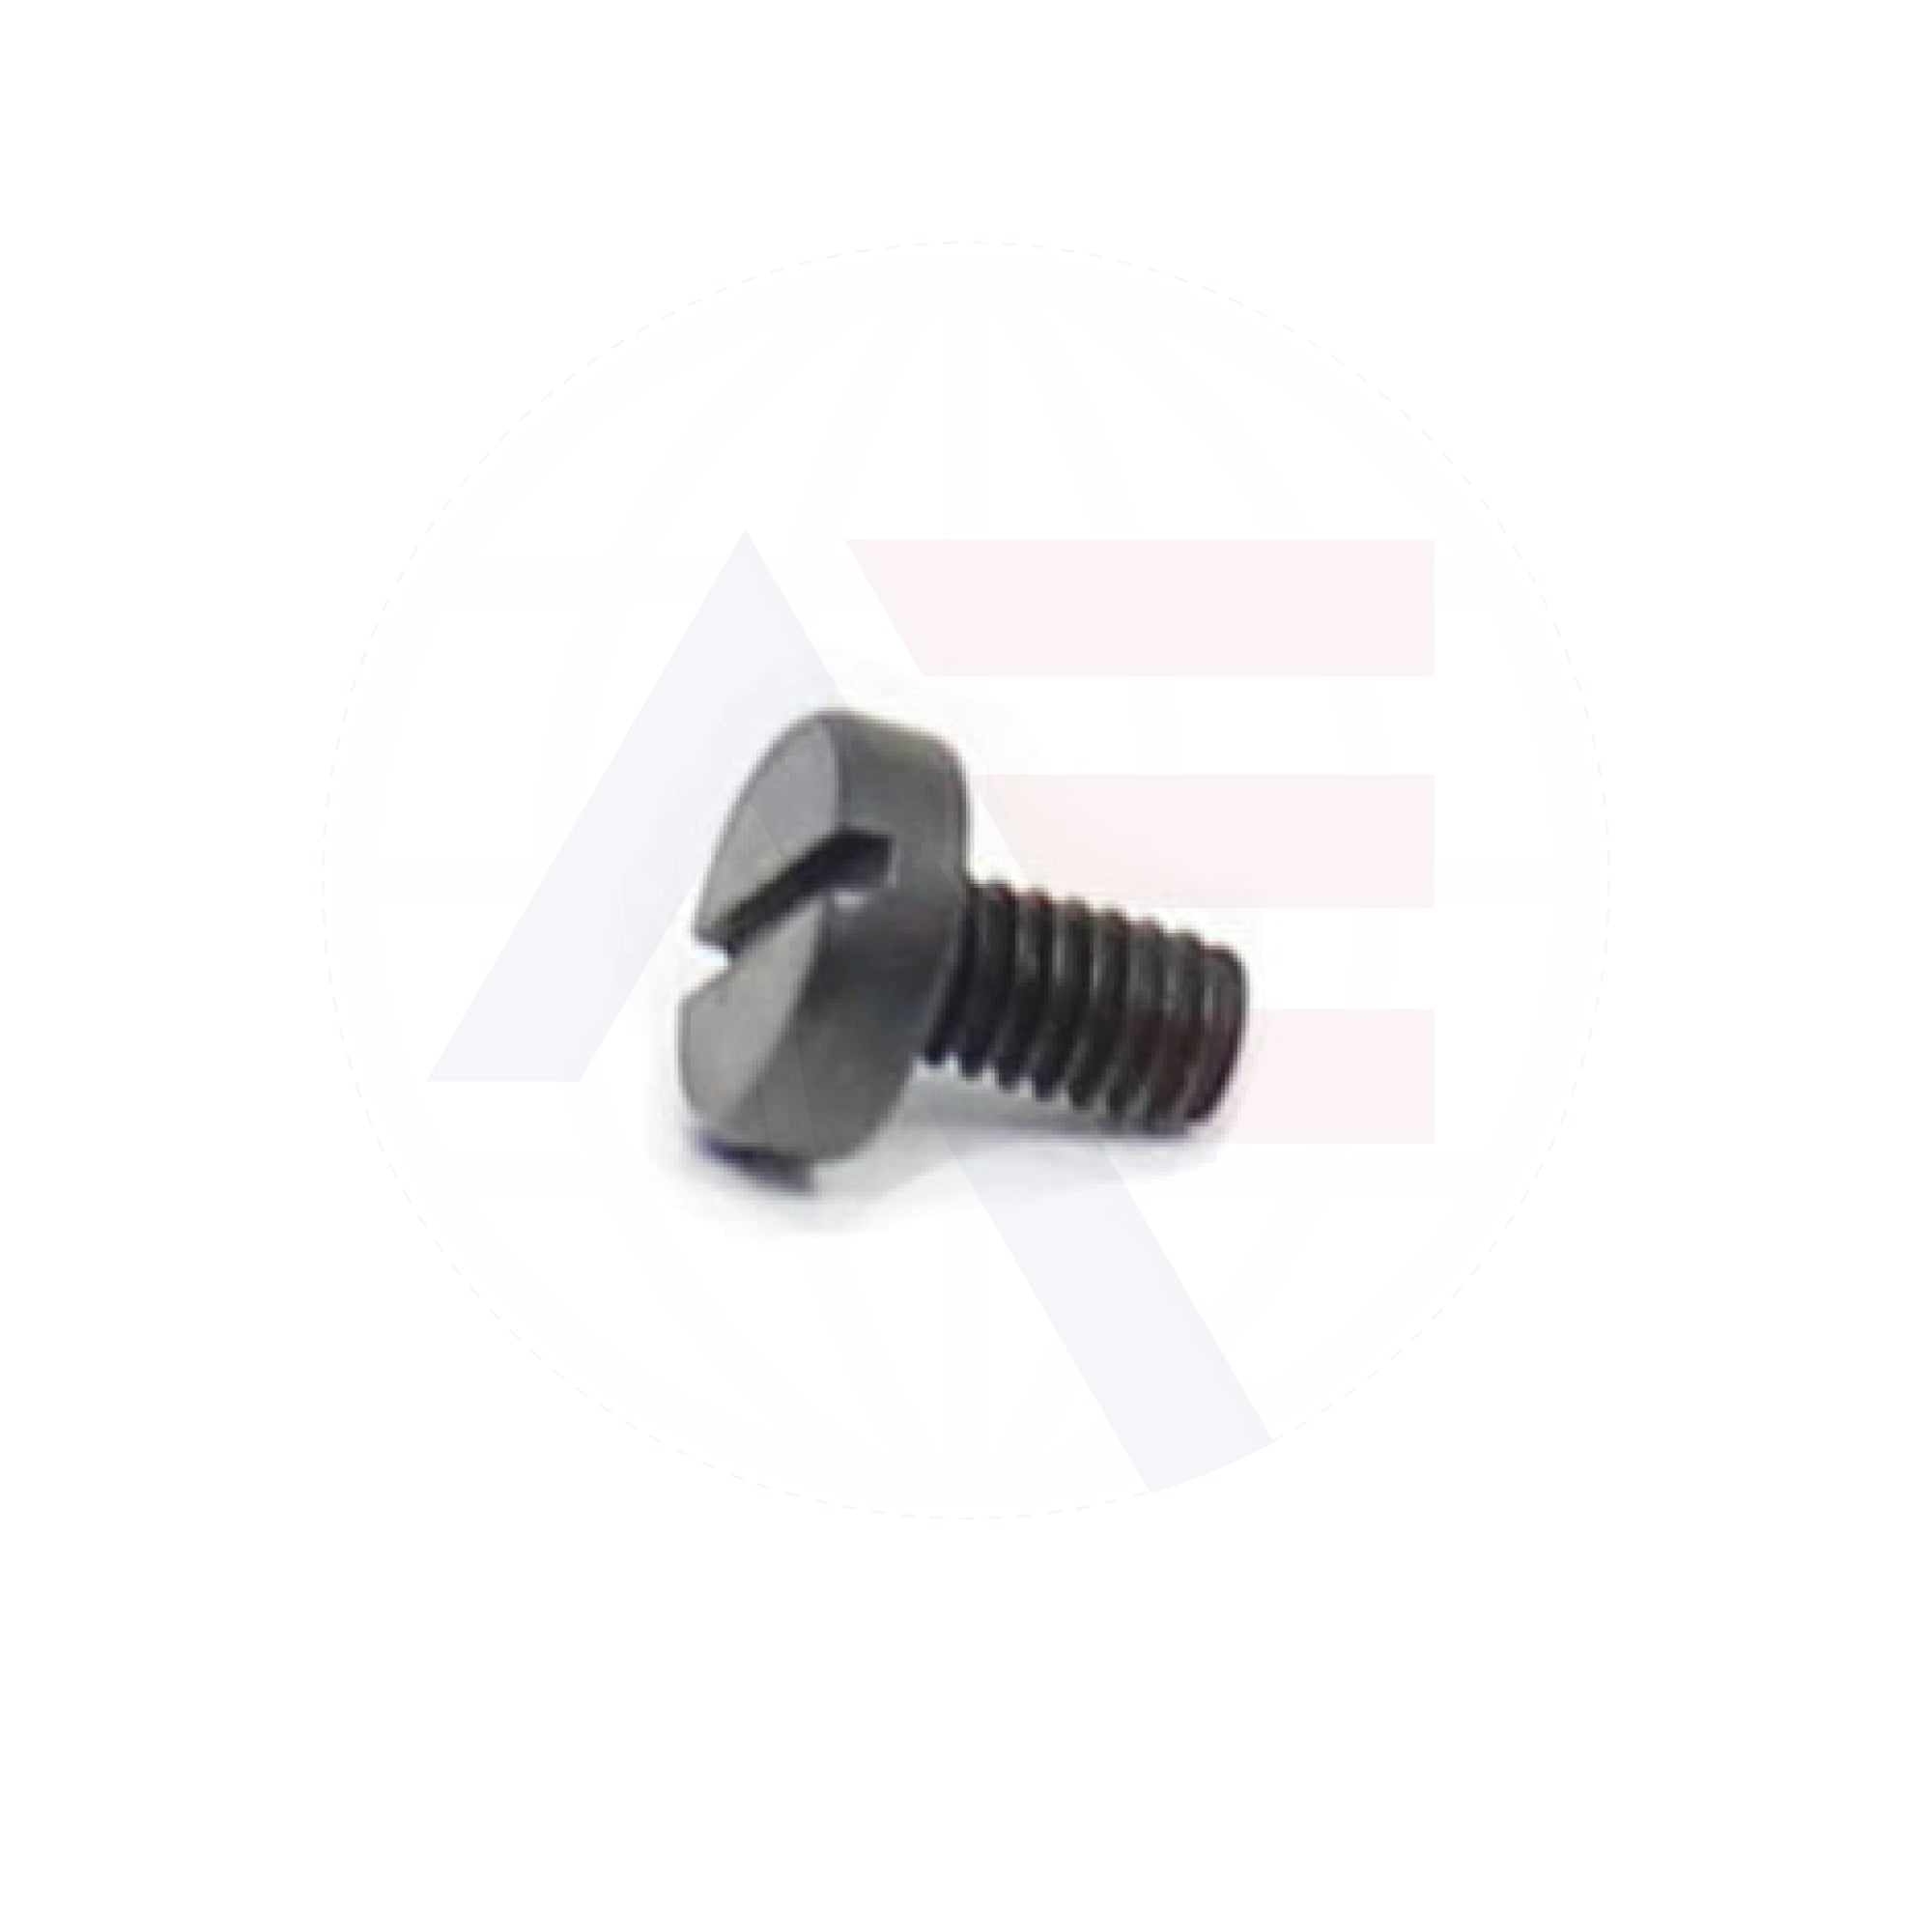 Ss6060440Tp Needle Guard Holding Screw.